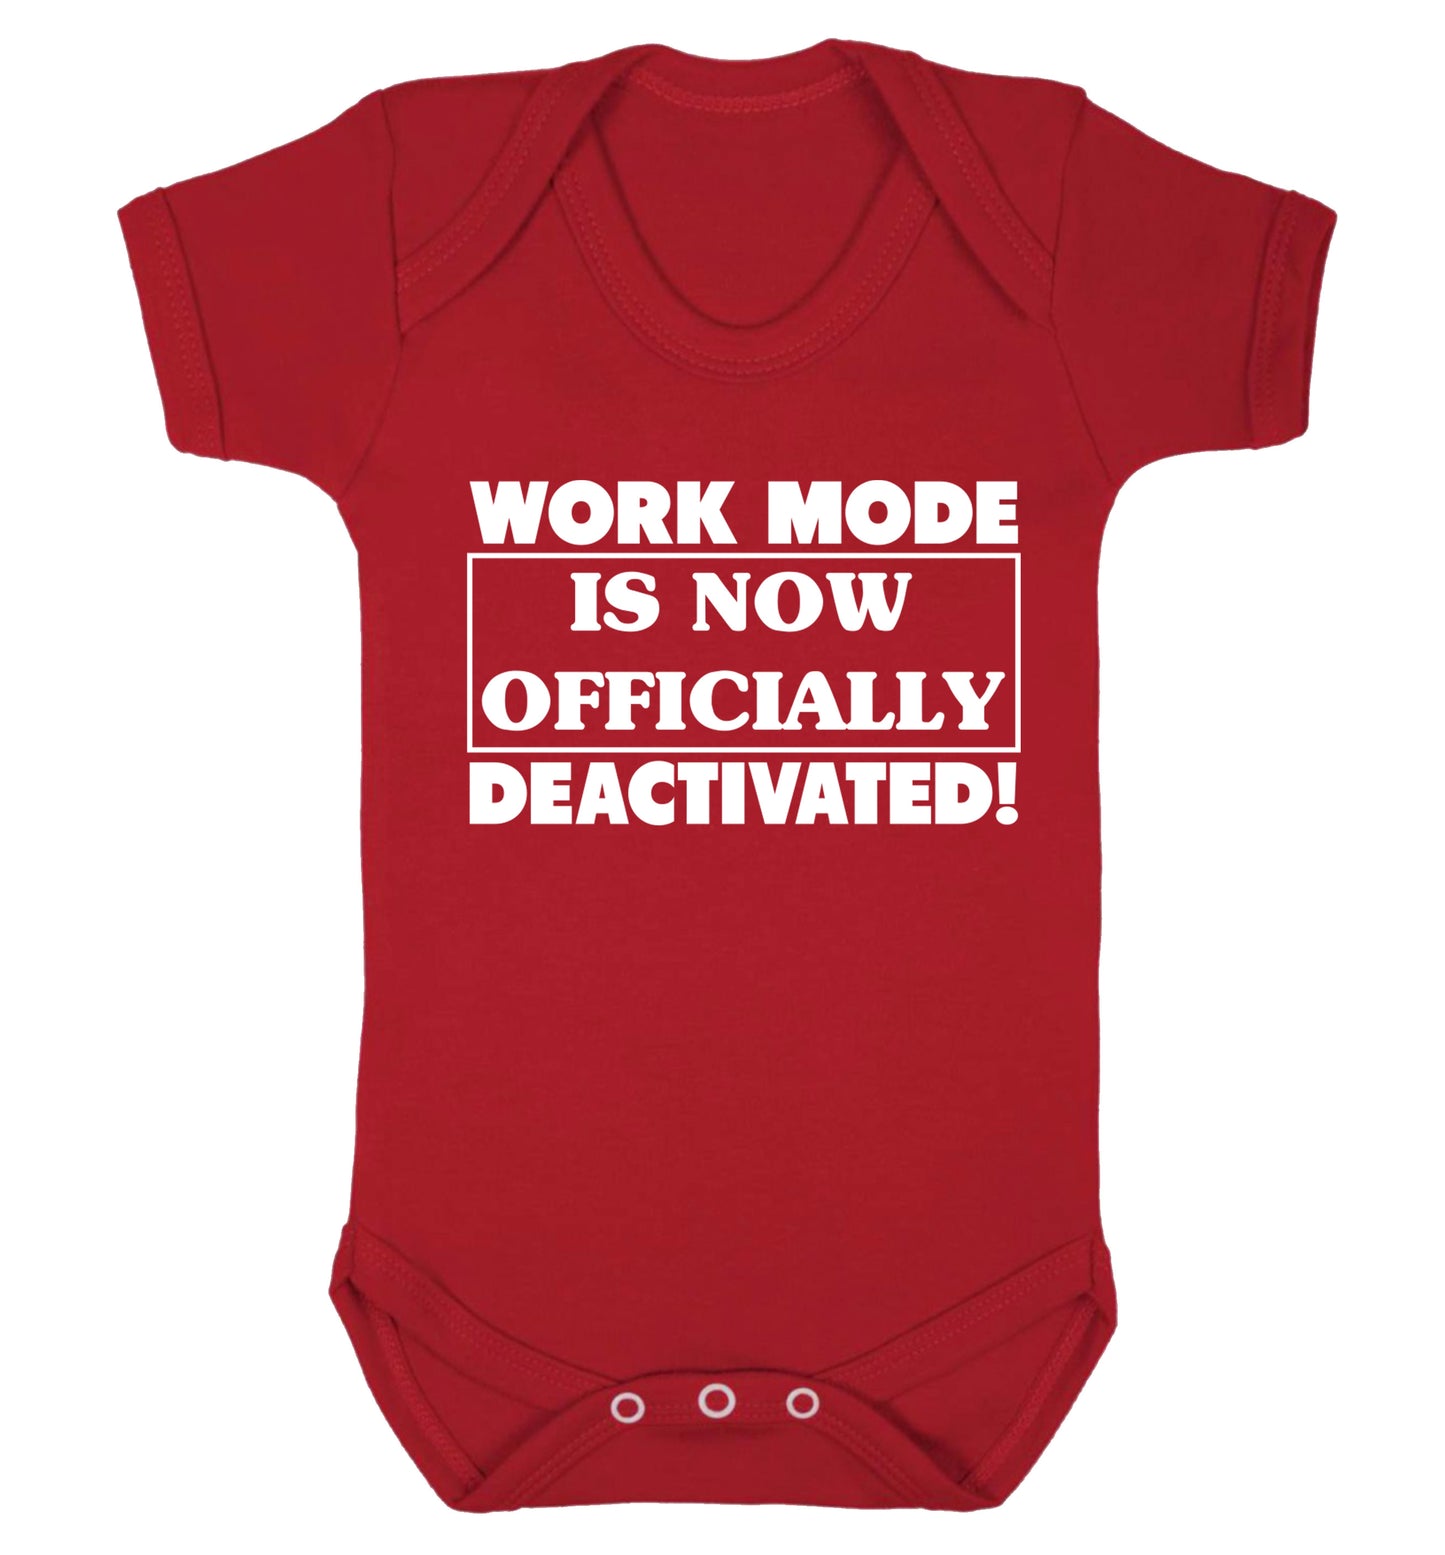 Work mode is now officially deactivated Baby Vest red 18-24 months